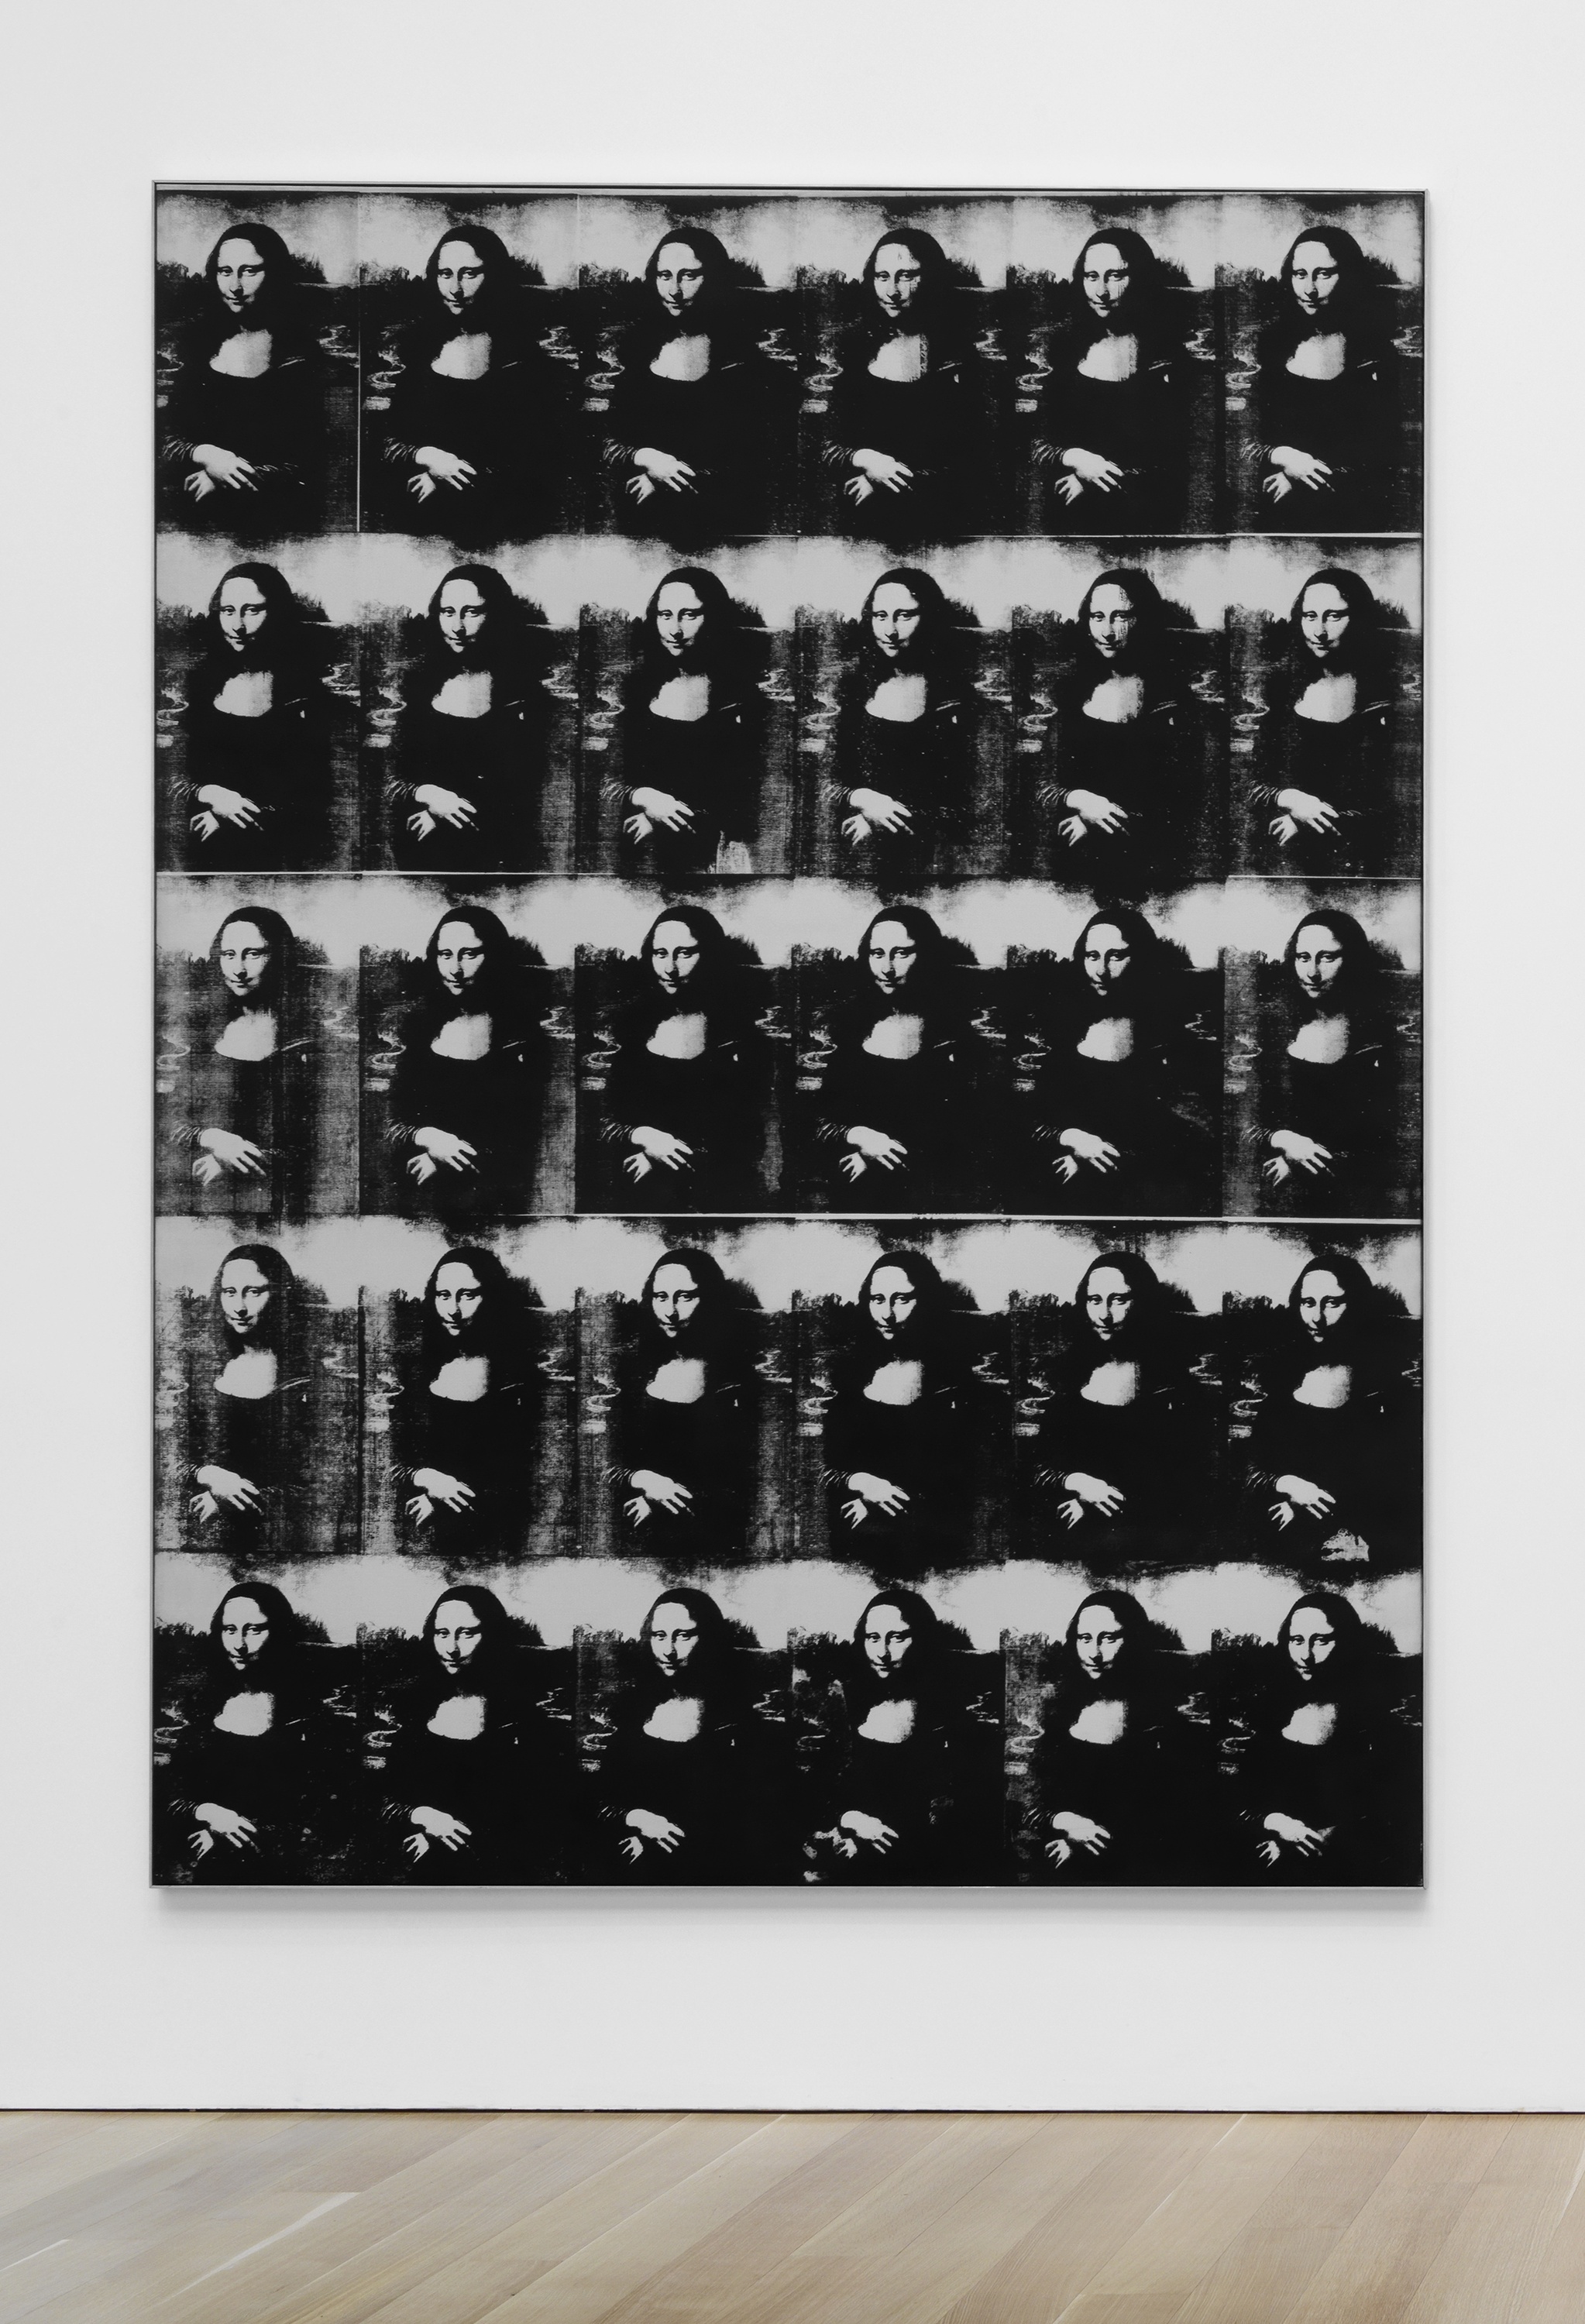 A close-up of Warhol's "Thirty are better than one."